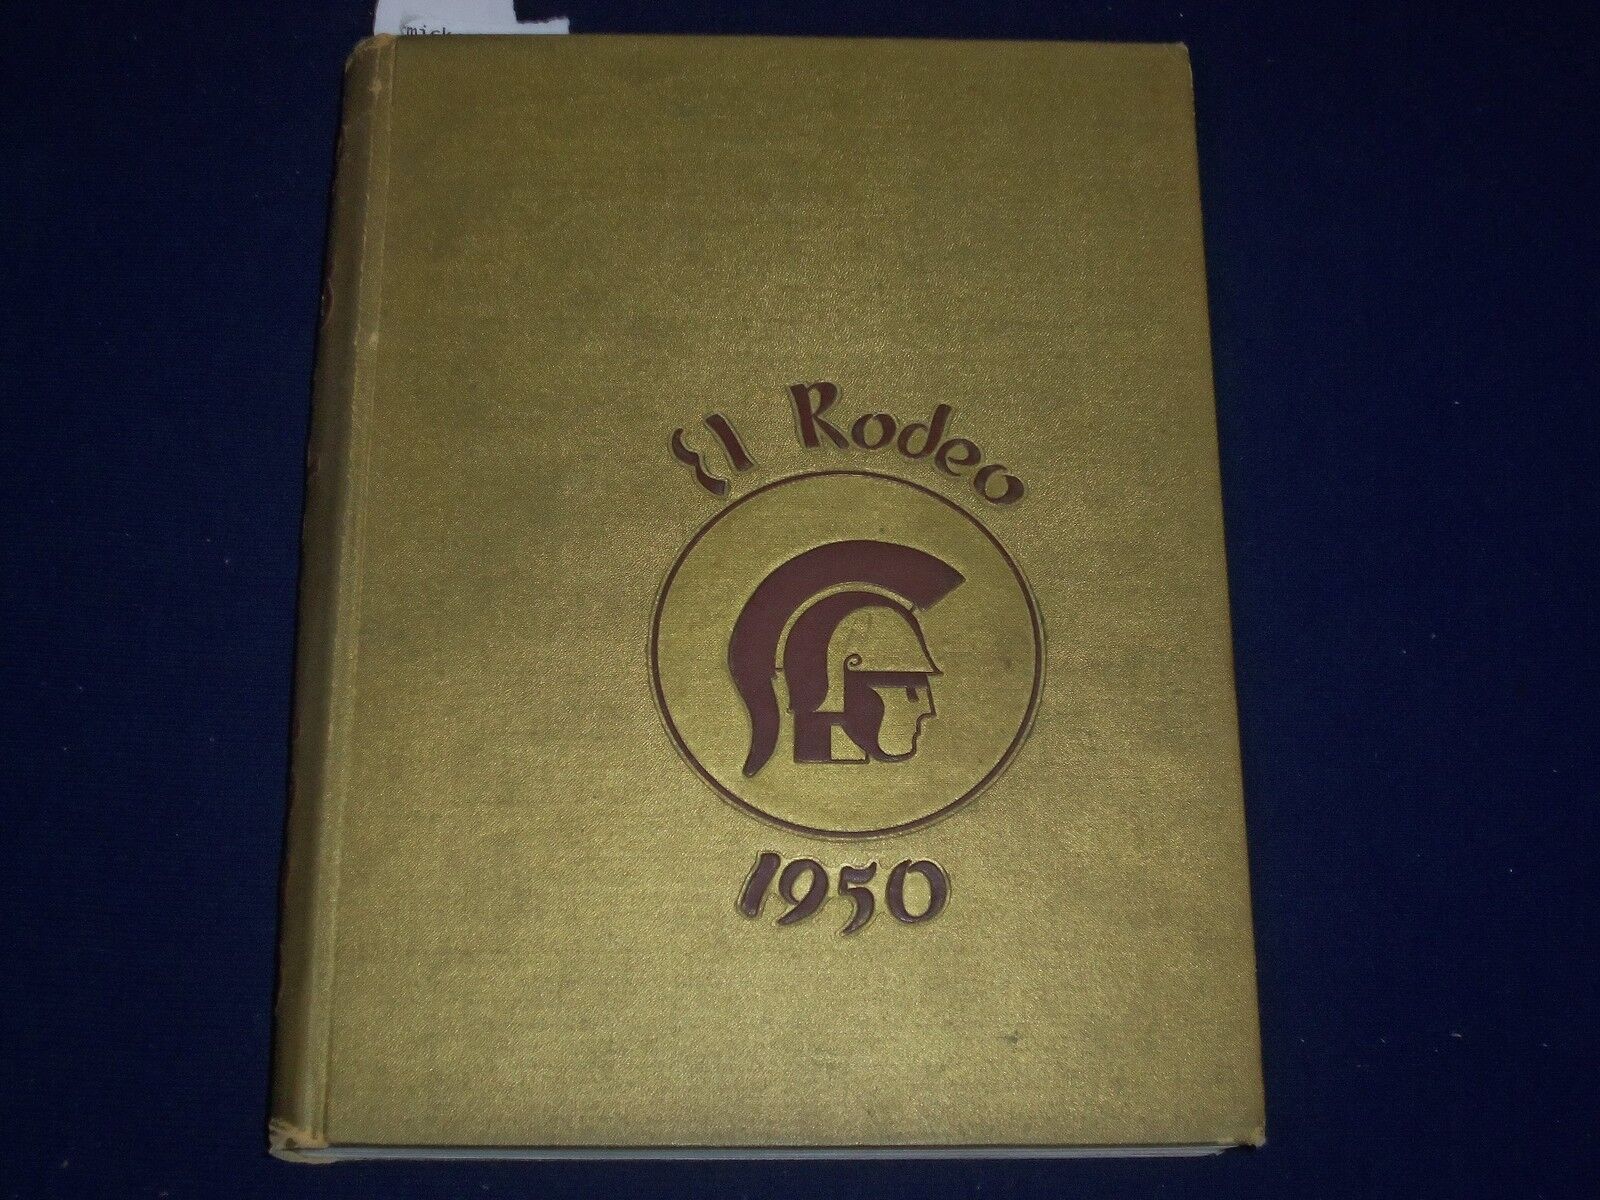 1950 EL RODEO UNIVERSITY OF SOUTHERN CALI YEARBOOK - GIFFORD & SHARMAN - YB 437